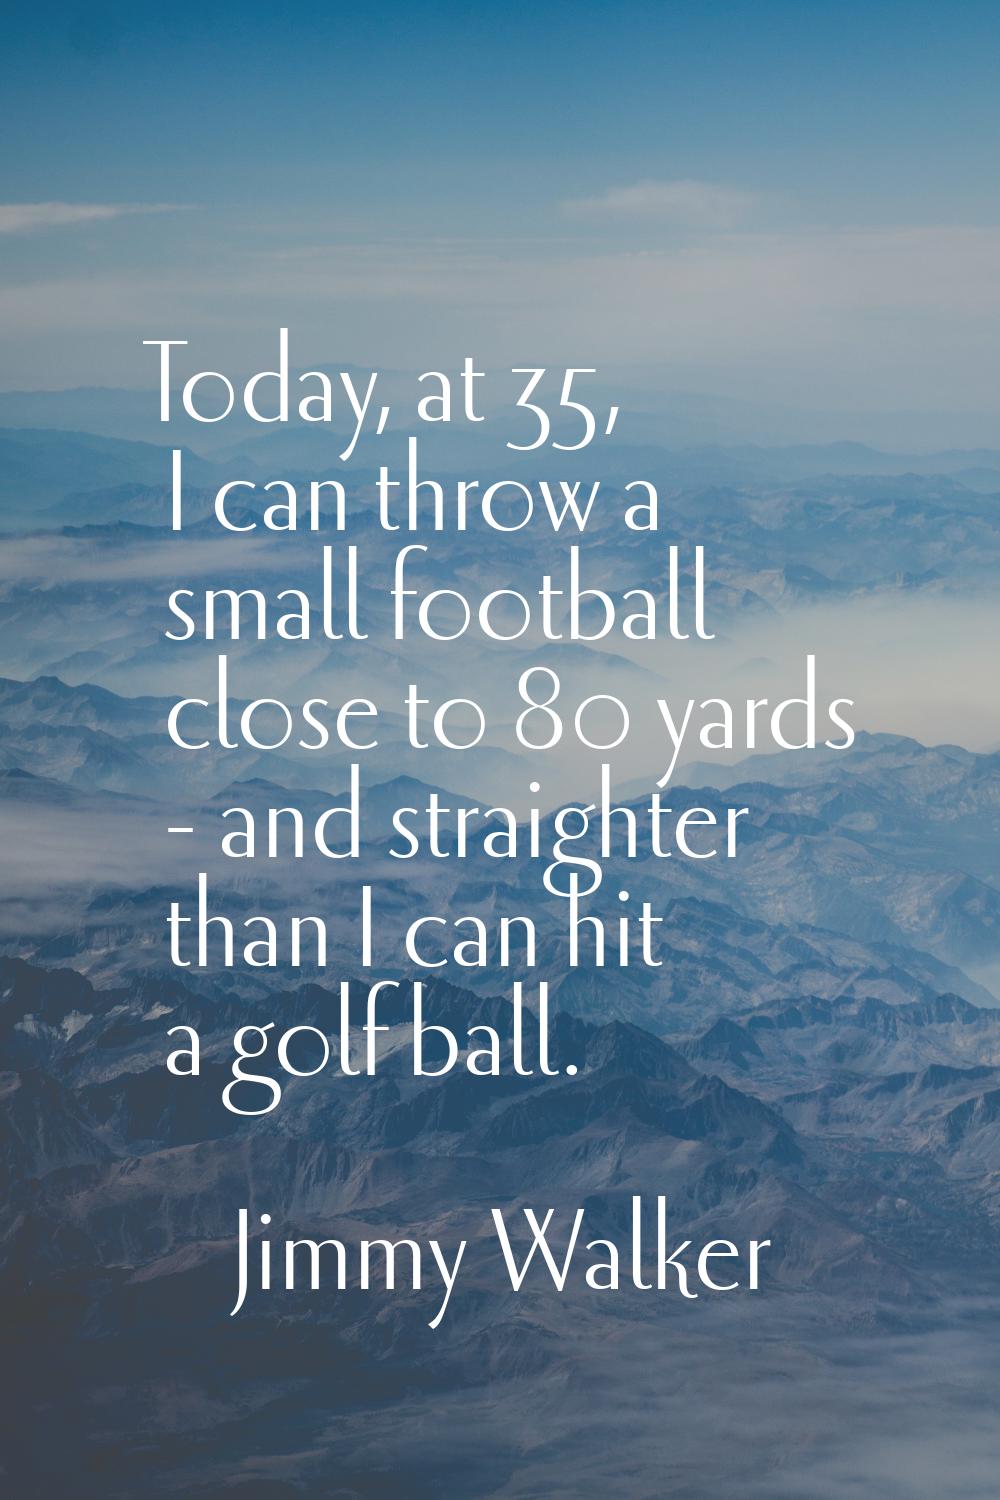 Today, at 35, I can throw a small football close to 80 yards - and straighter than I can hit a golf